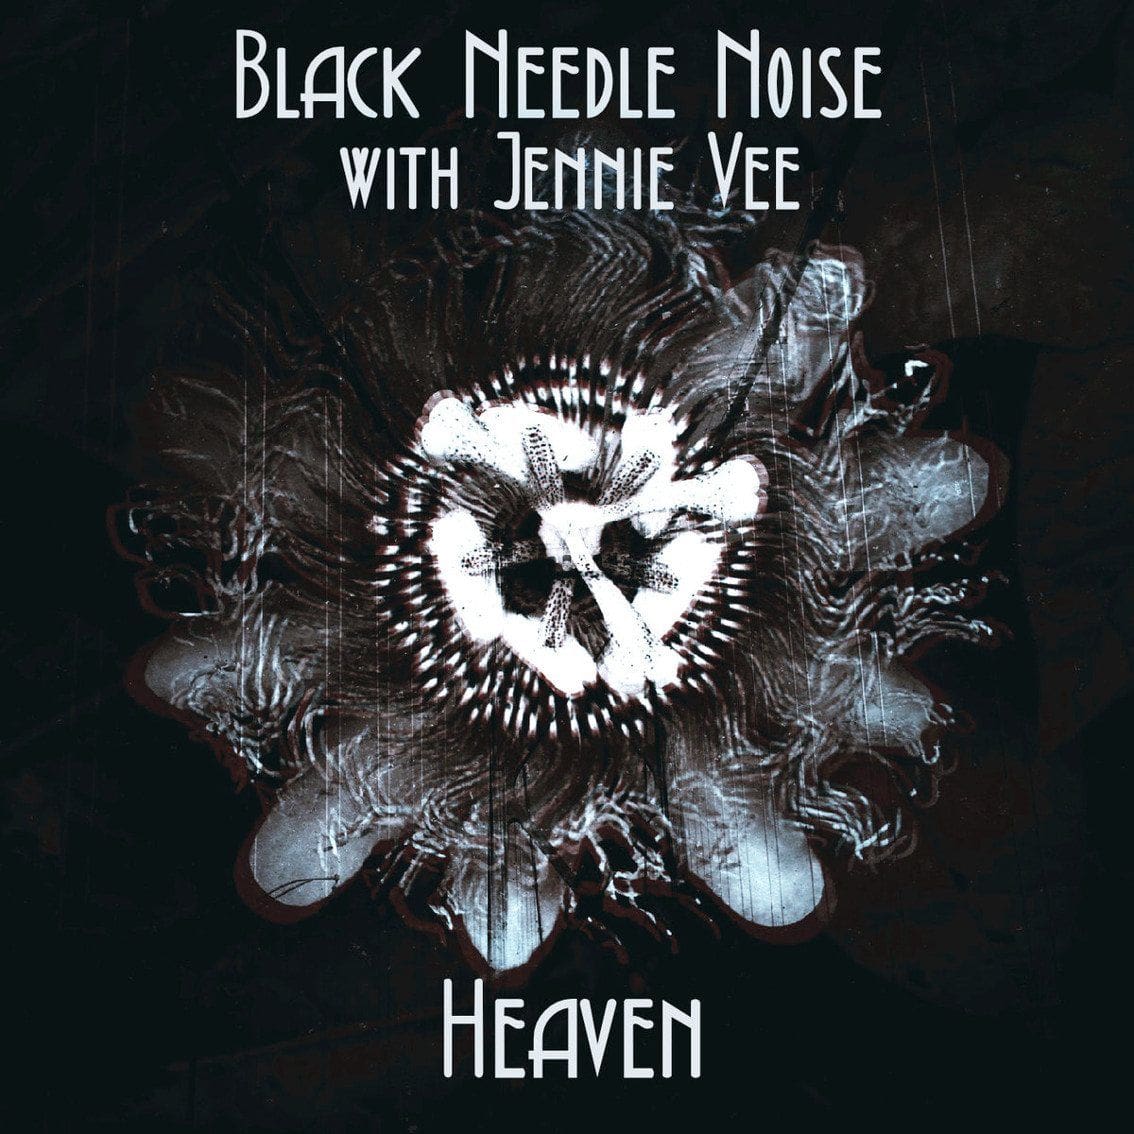 Delcious brand new download for John Fryer powered project Black Needle Noise with Jennie Vee - listen here